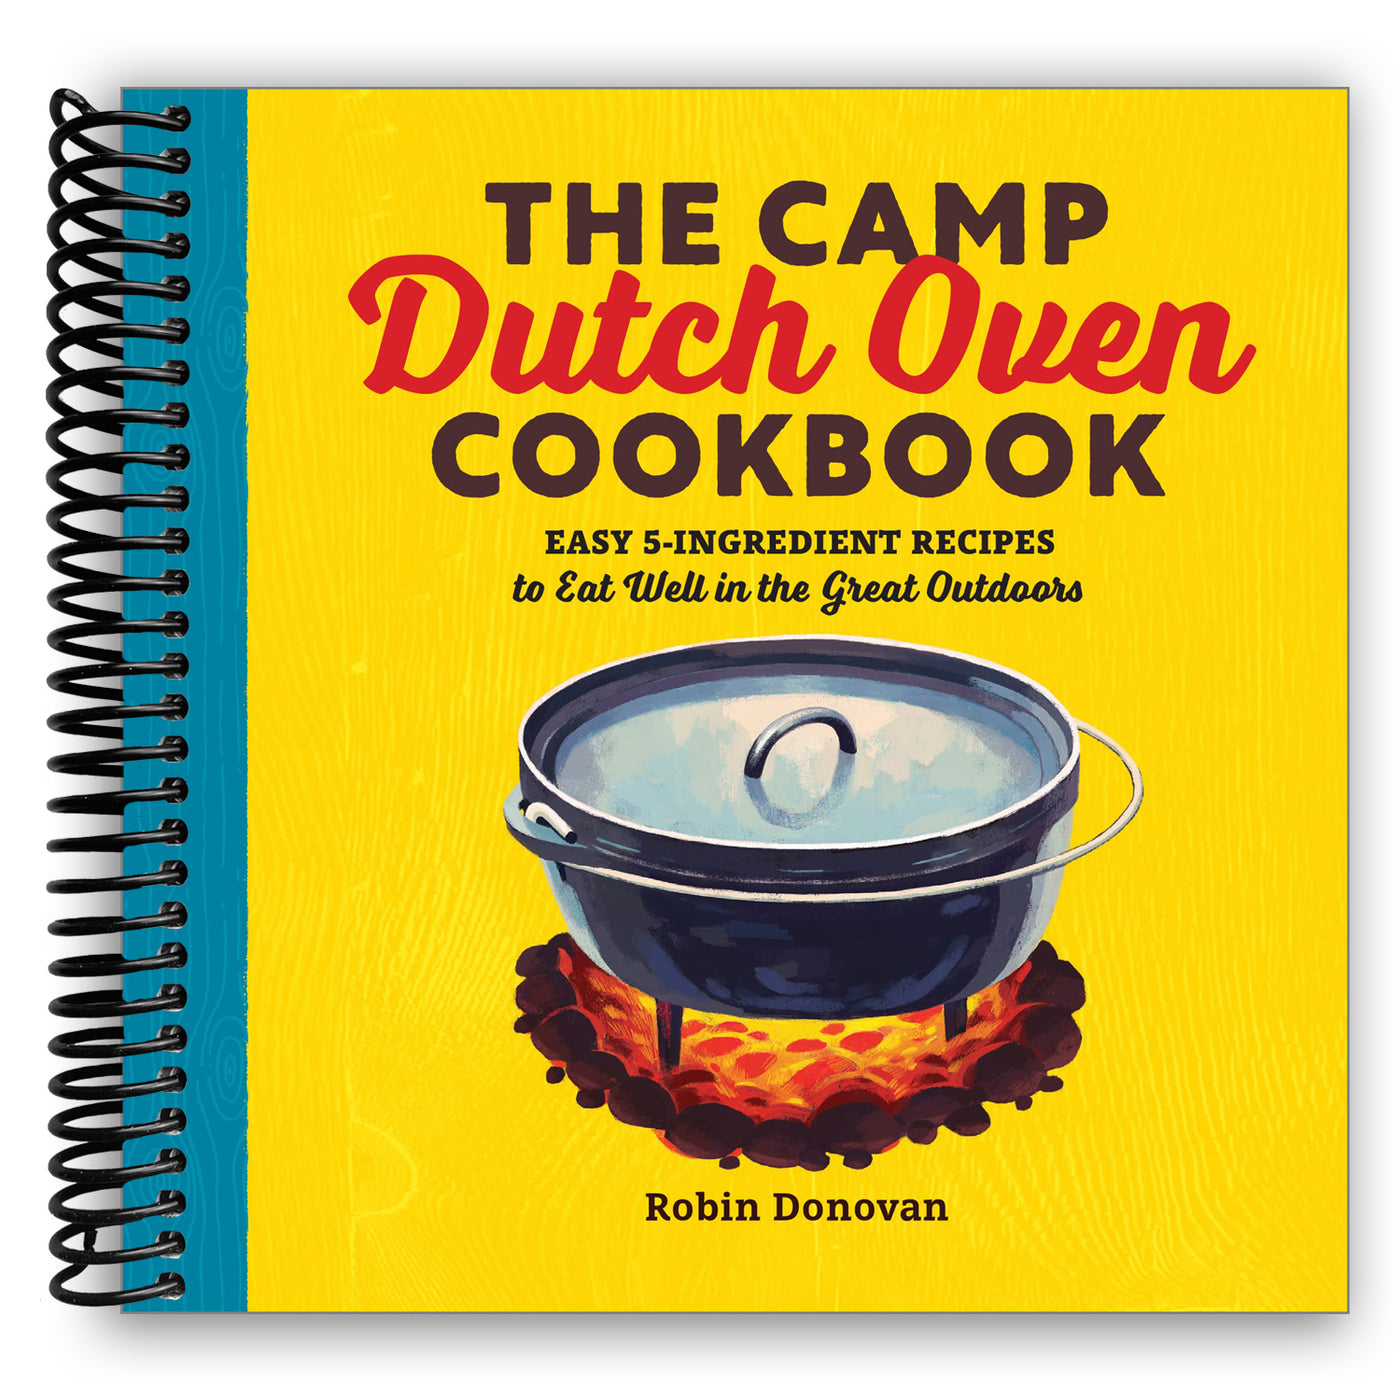 The Camp Dutch Oven Cookbook: Easy 5-Ingredient Recipes to Eat Well in the Great Outdoors (Spiral Bound)